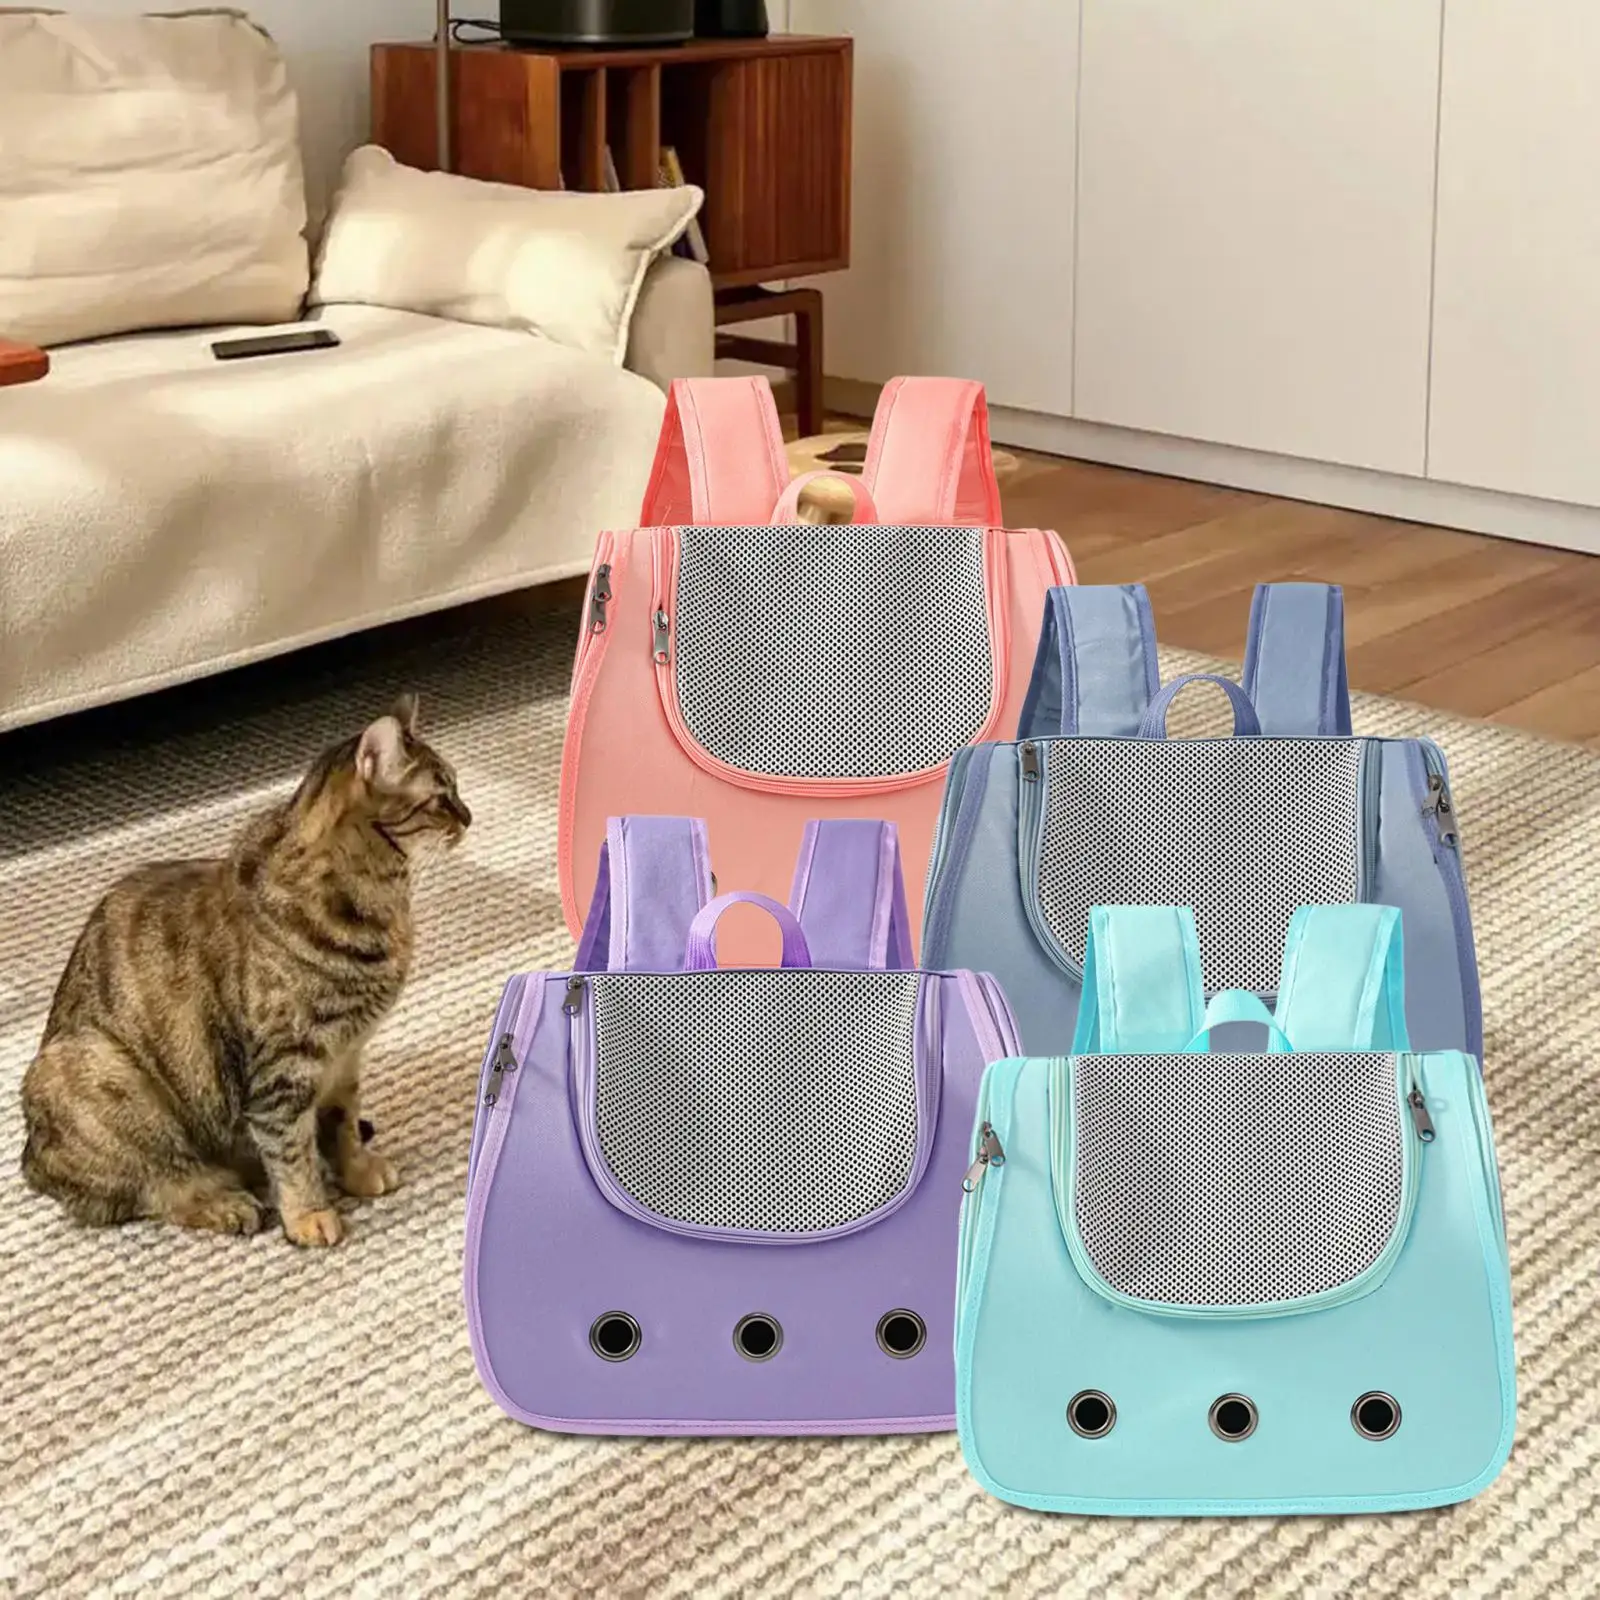 Cat Carrier Backpack Portable Ventilation Comfortable Pet Travel Backpack for Traveling Walking Hiking Outdoor Use Camping